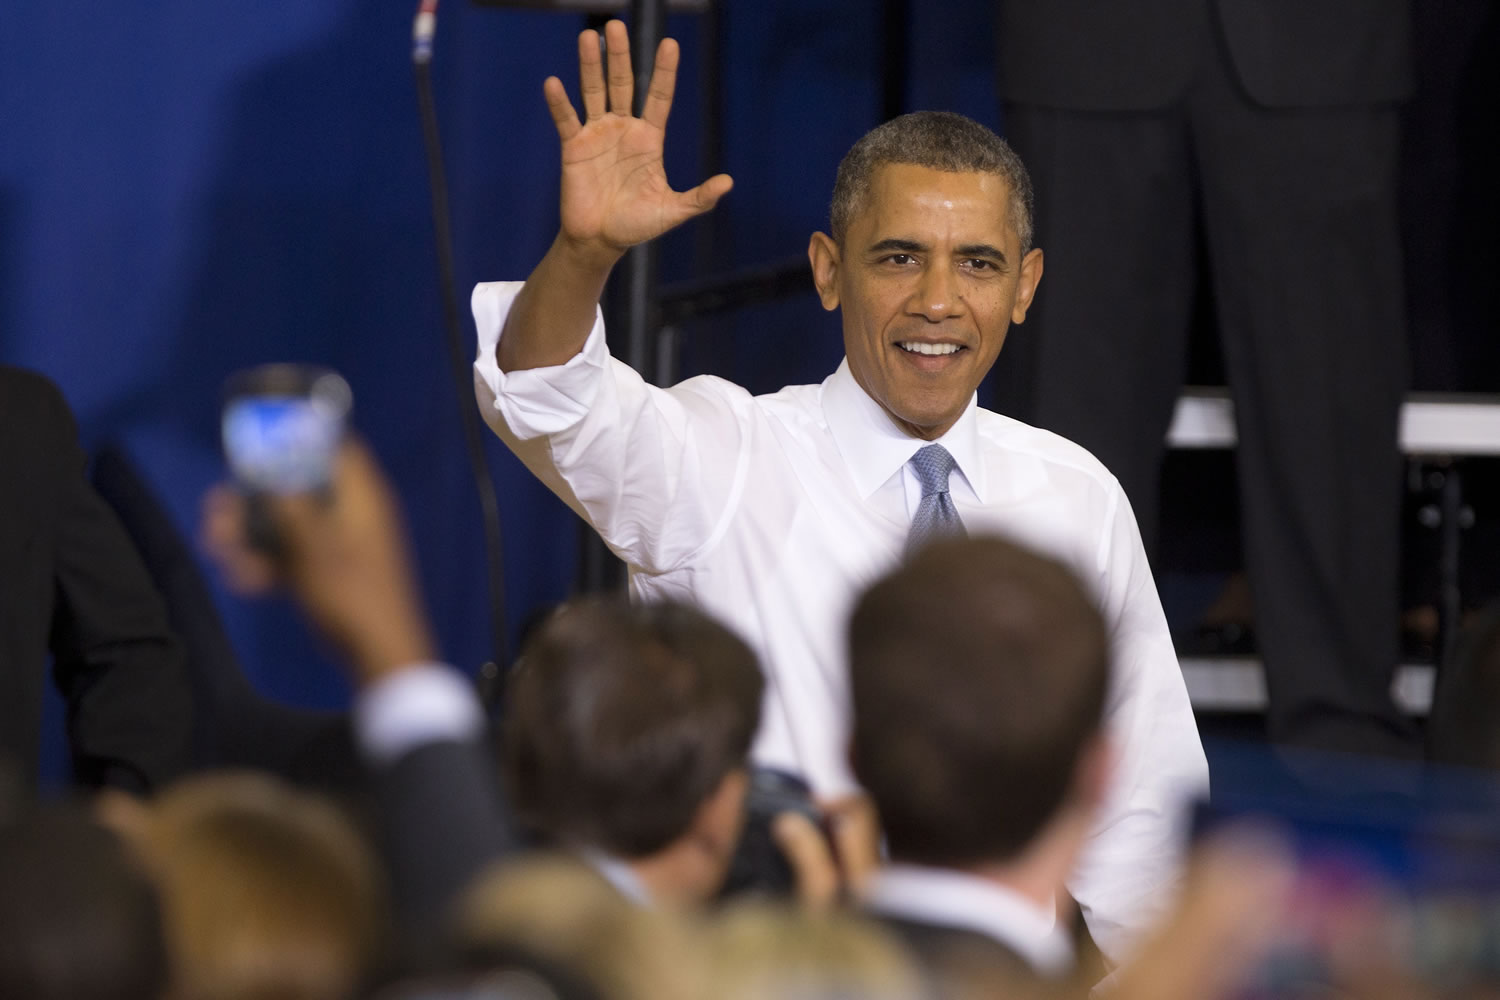 President Barack Obama waves as he arrives to speak about the Affordable Care Act on Thursday at Prince George's Community College in Largo, Md.